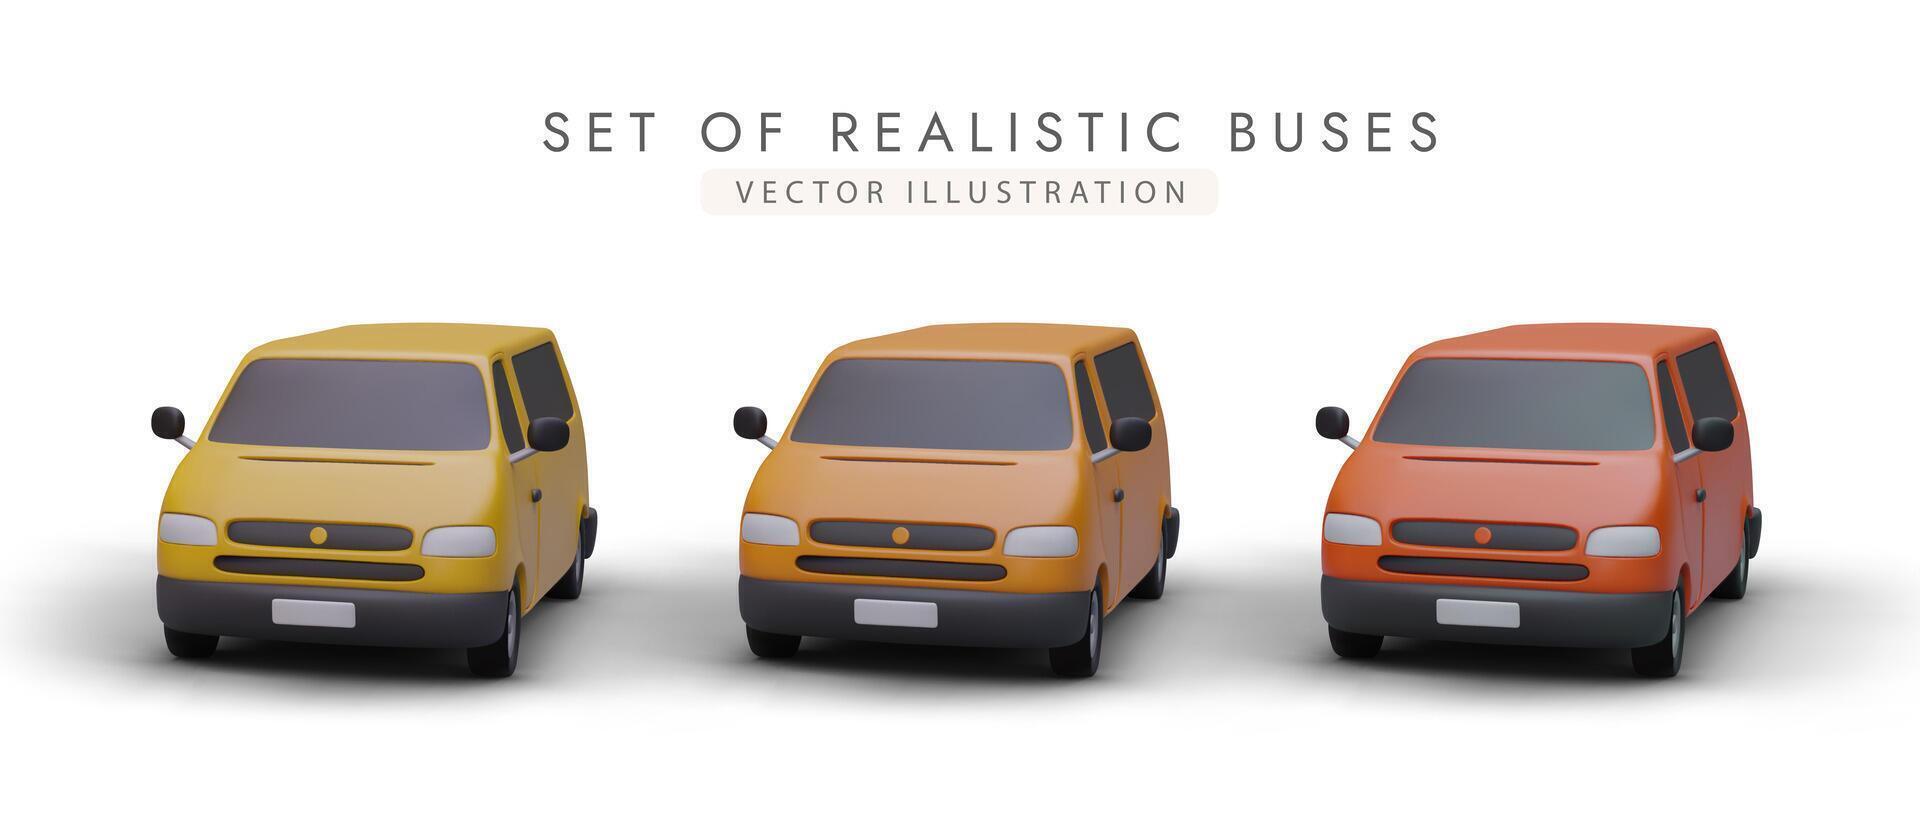 Set of realistic mini buses in different colors. Minivans for transporting groups of people vector